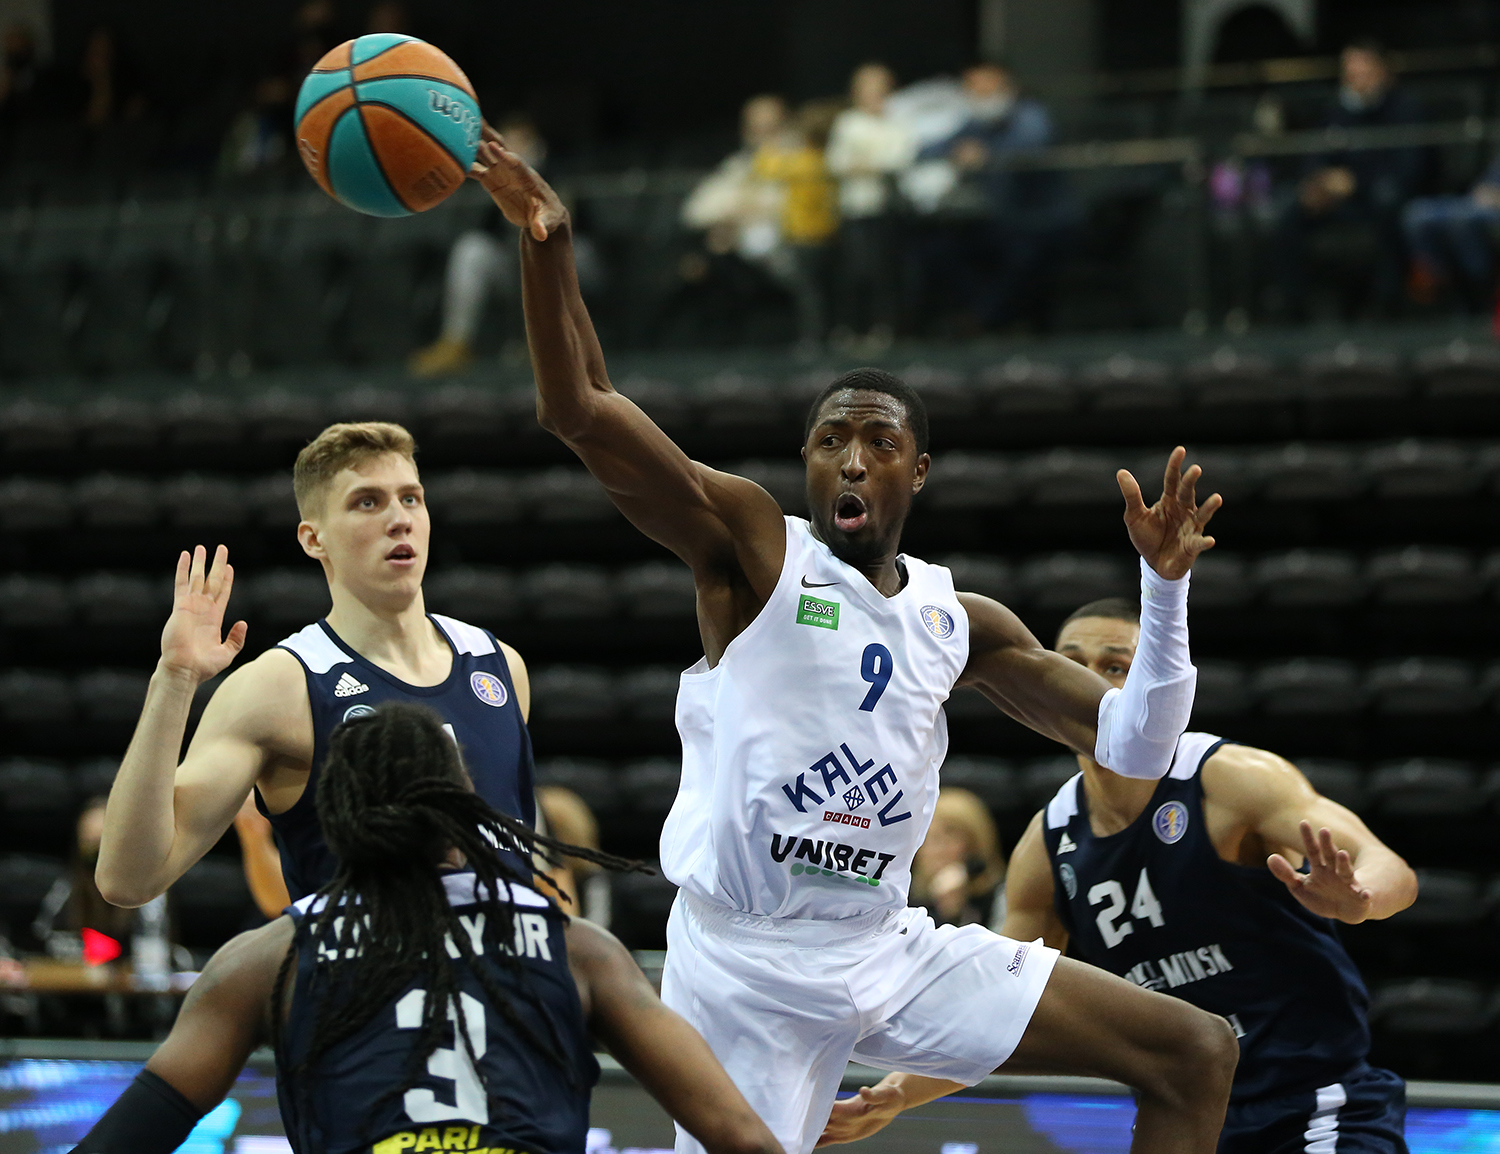 Kalev take first away victory of the season in Minsk